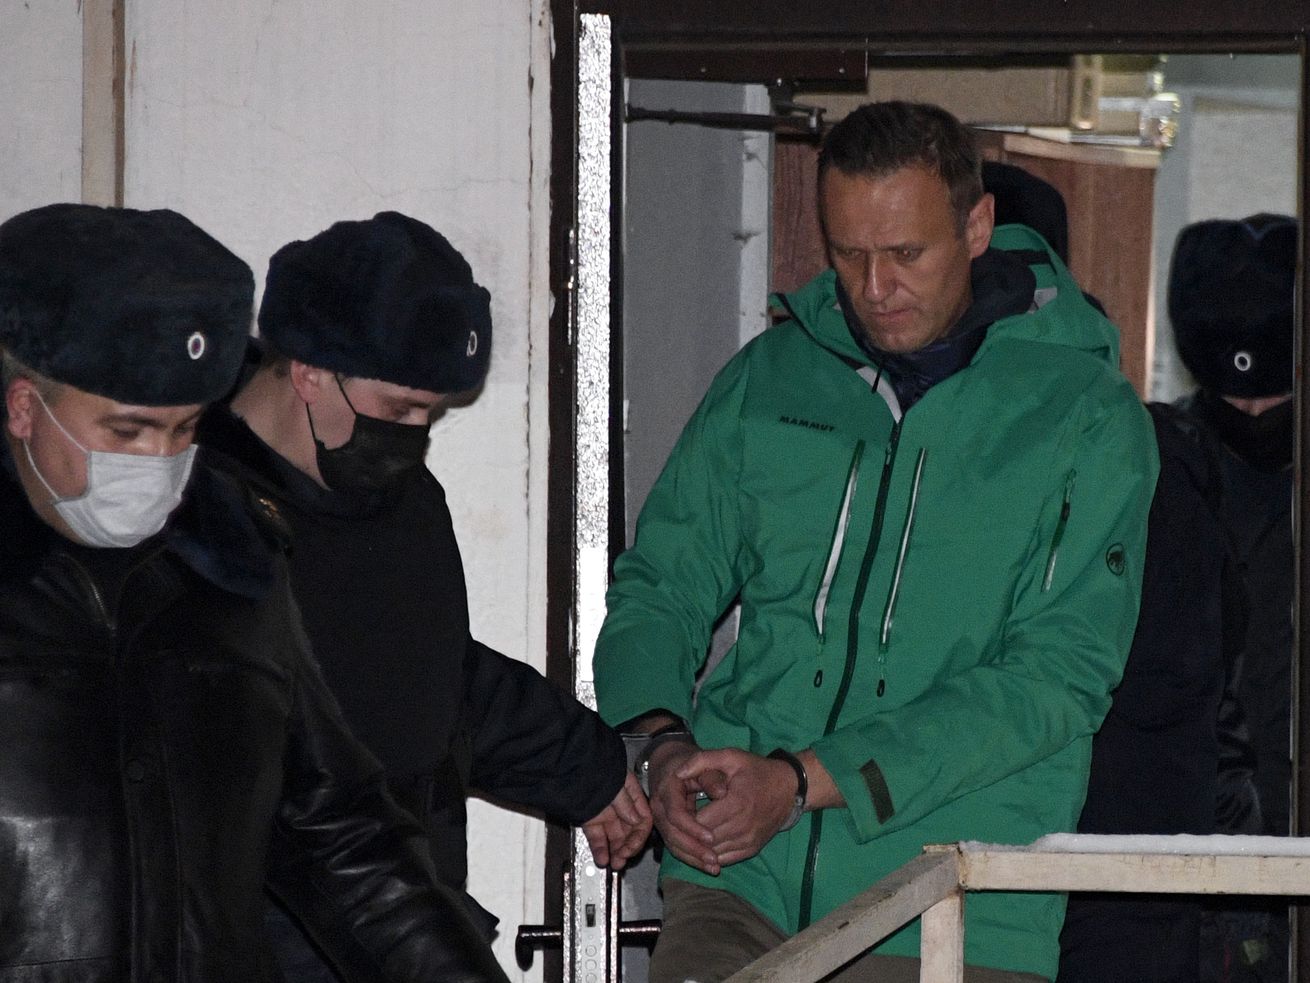 US to sanction Russian officials over the attempted murder of Alexei Navalny